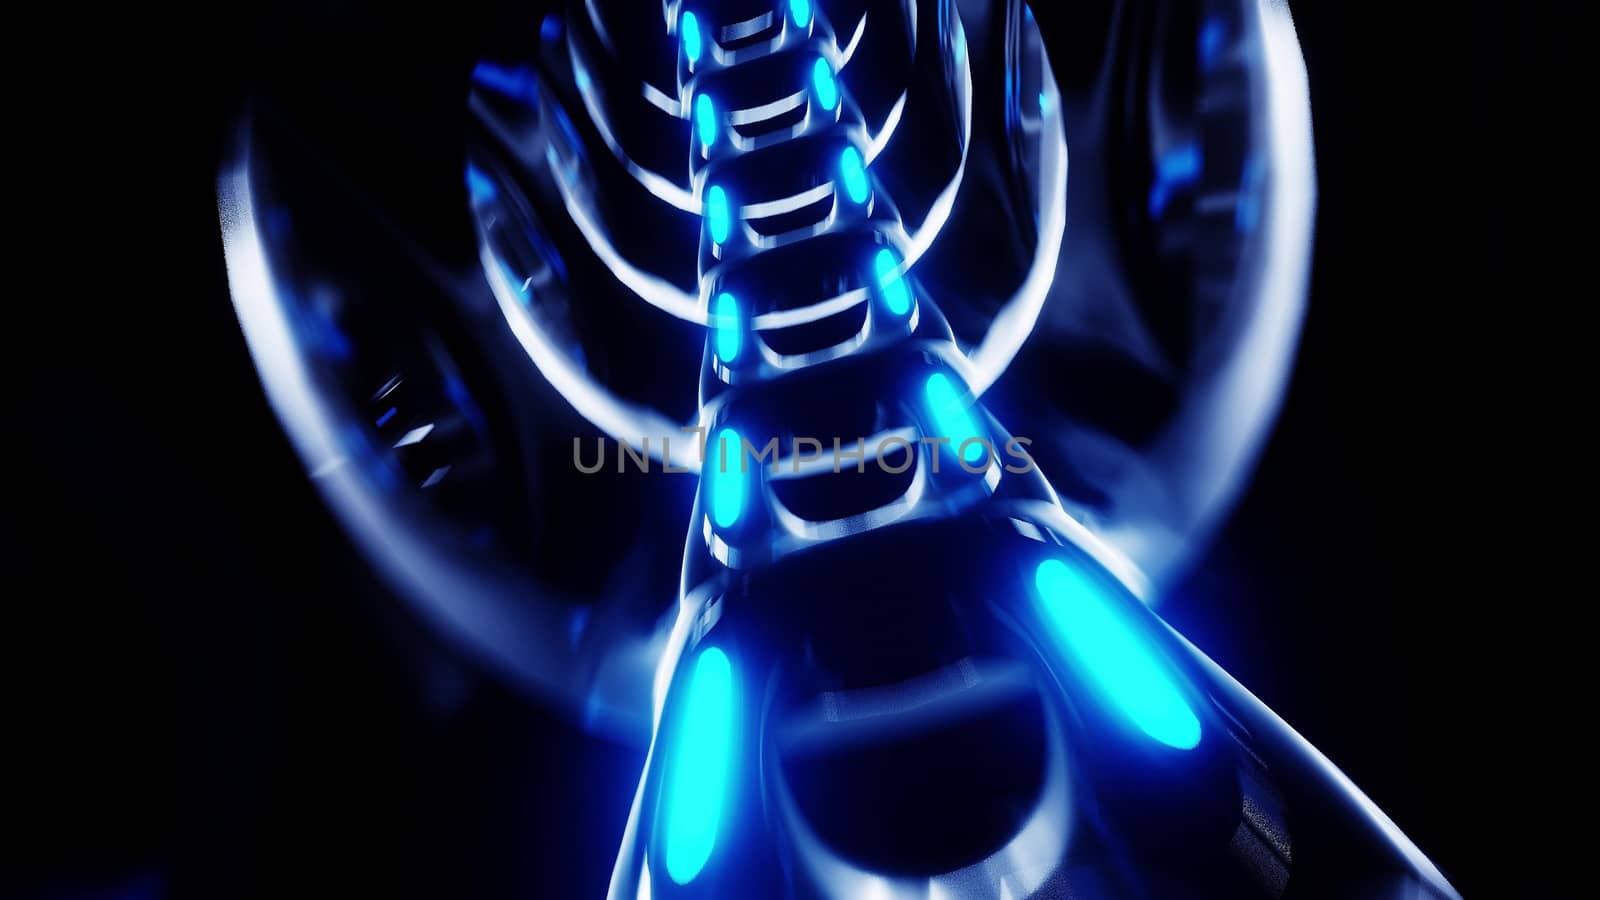 abstract futuristic sci-fi tunnel corridor 3d illustration background wallpaper by tunnelmotions